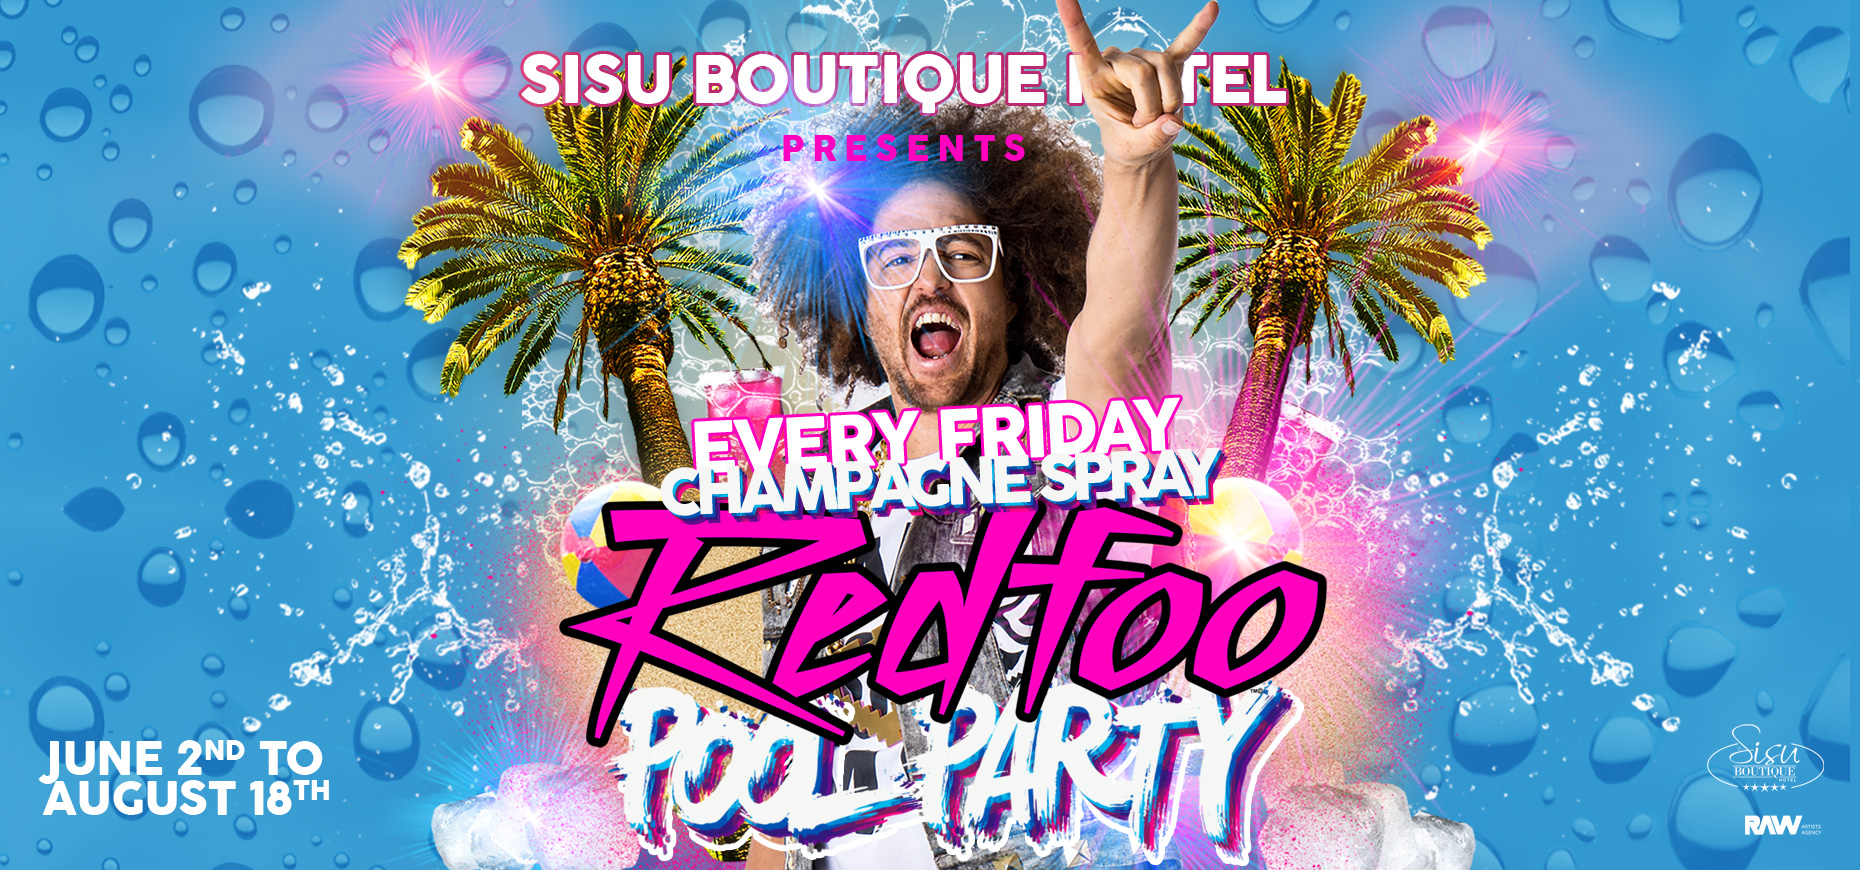 Redfoo - Champagne Showers